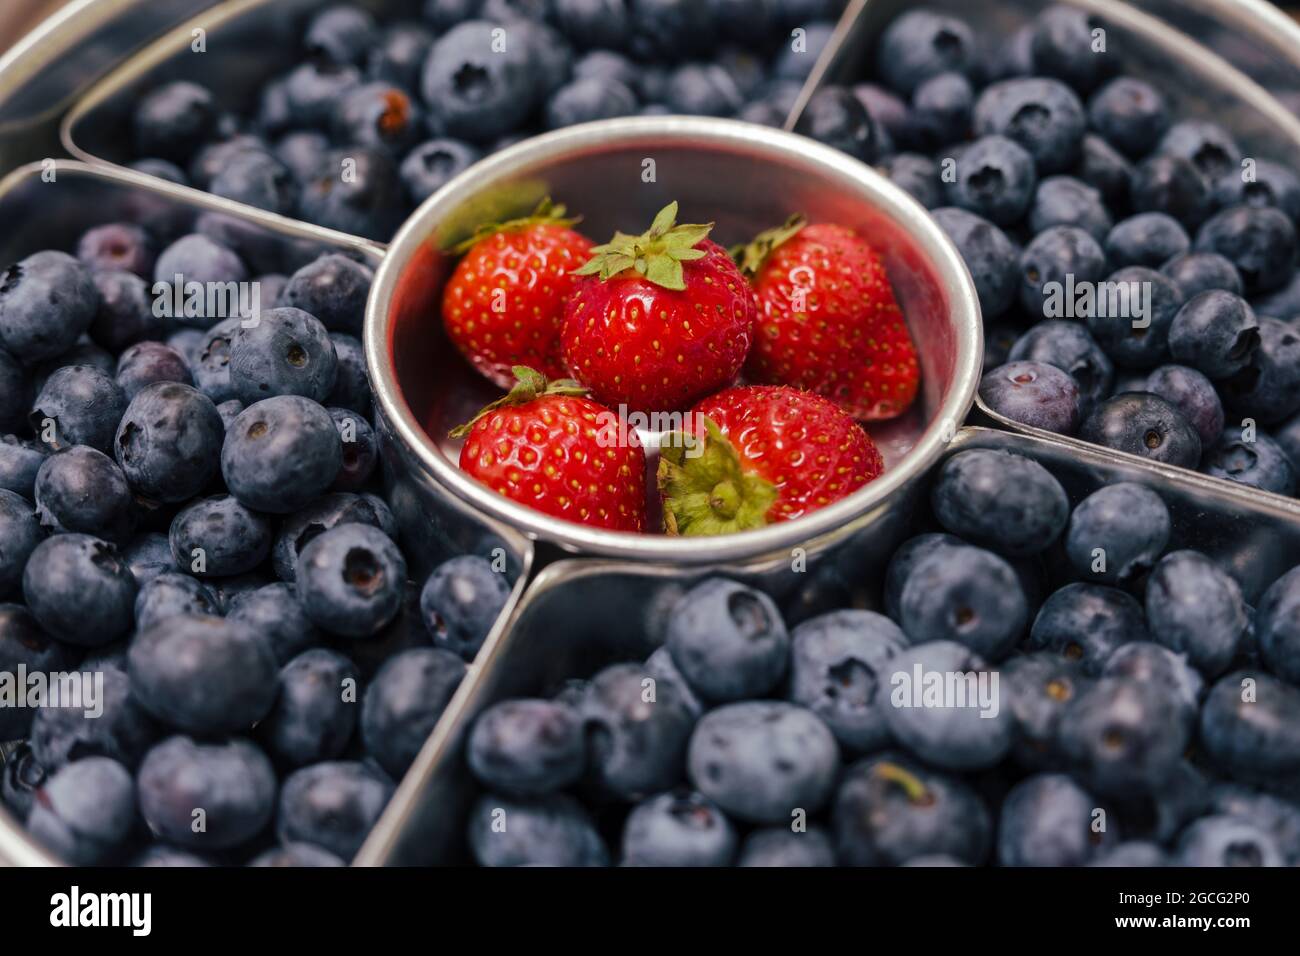 a platter of blueberries and strawberries Stock Photo